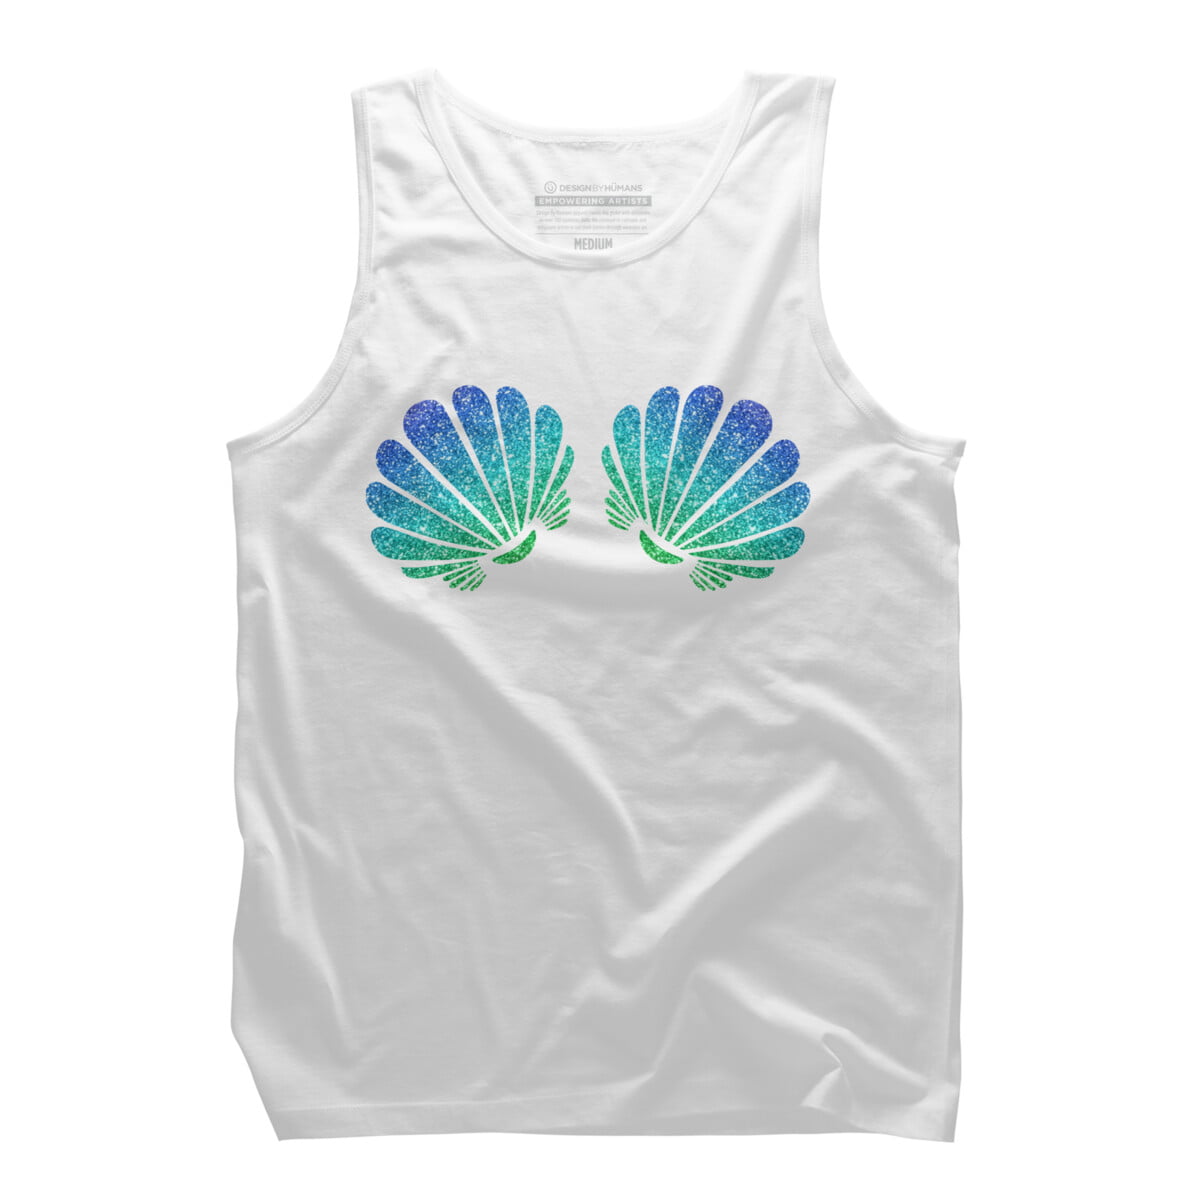 Funny mermaid sea shell bra halloween costume gift Mens White Graphic Tank  Top - Design By Humans S